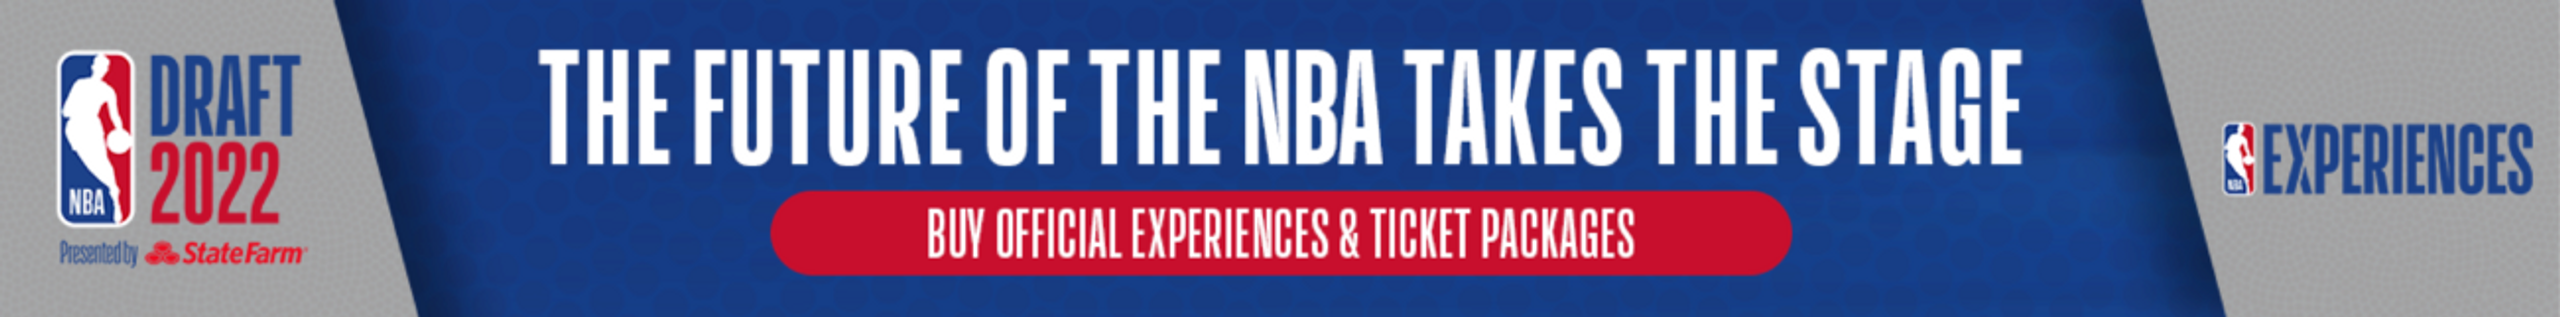 NBA Experiences - The Future Of The NBA Takes The Stage